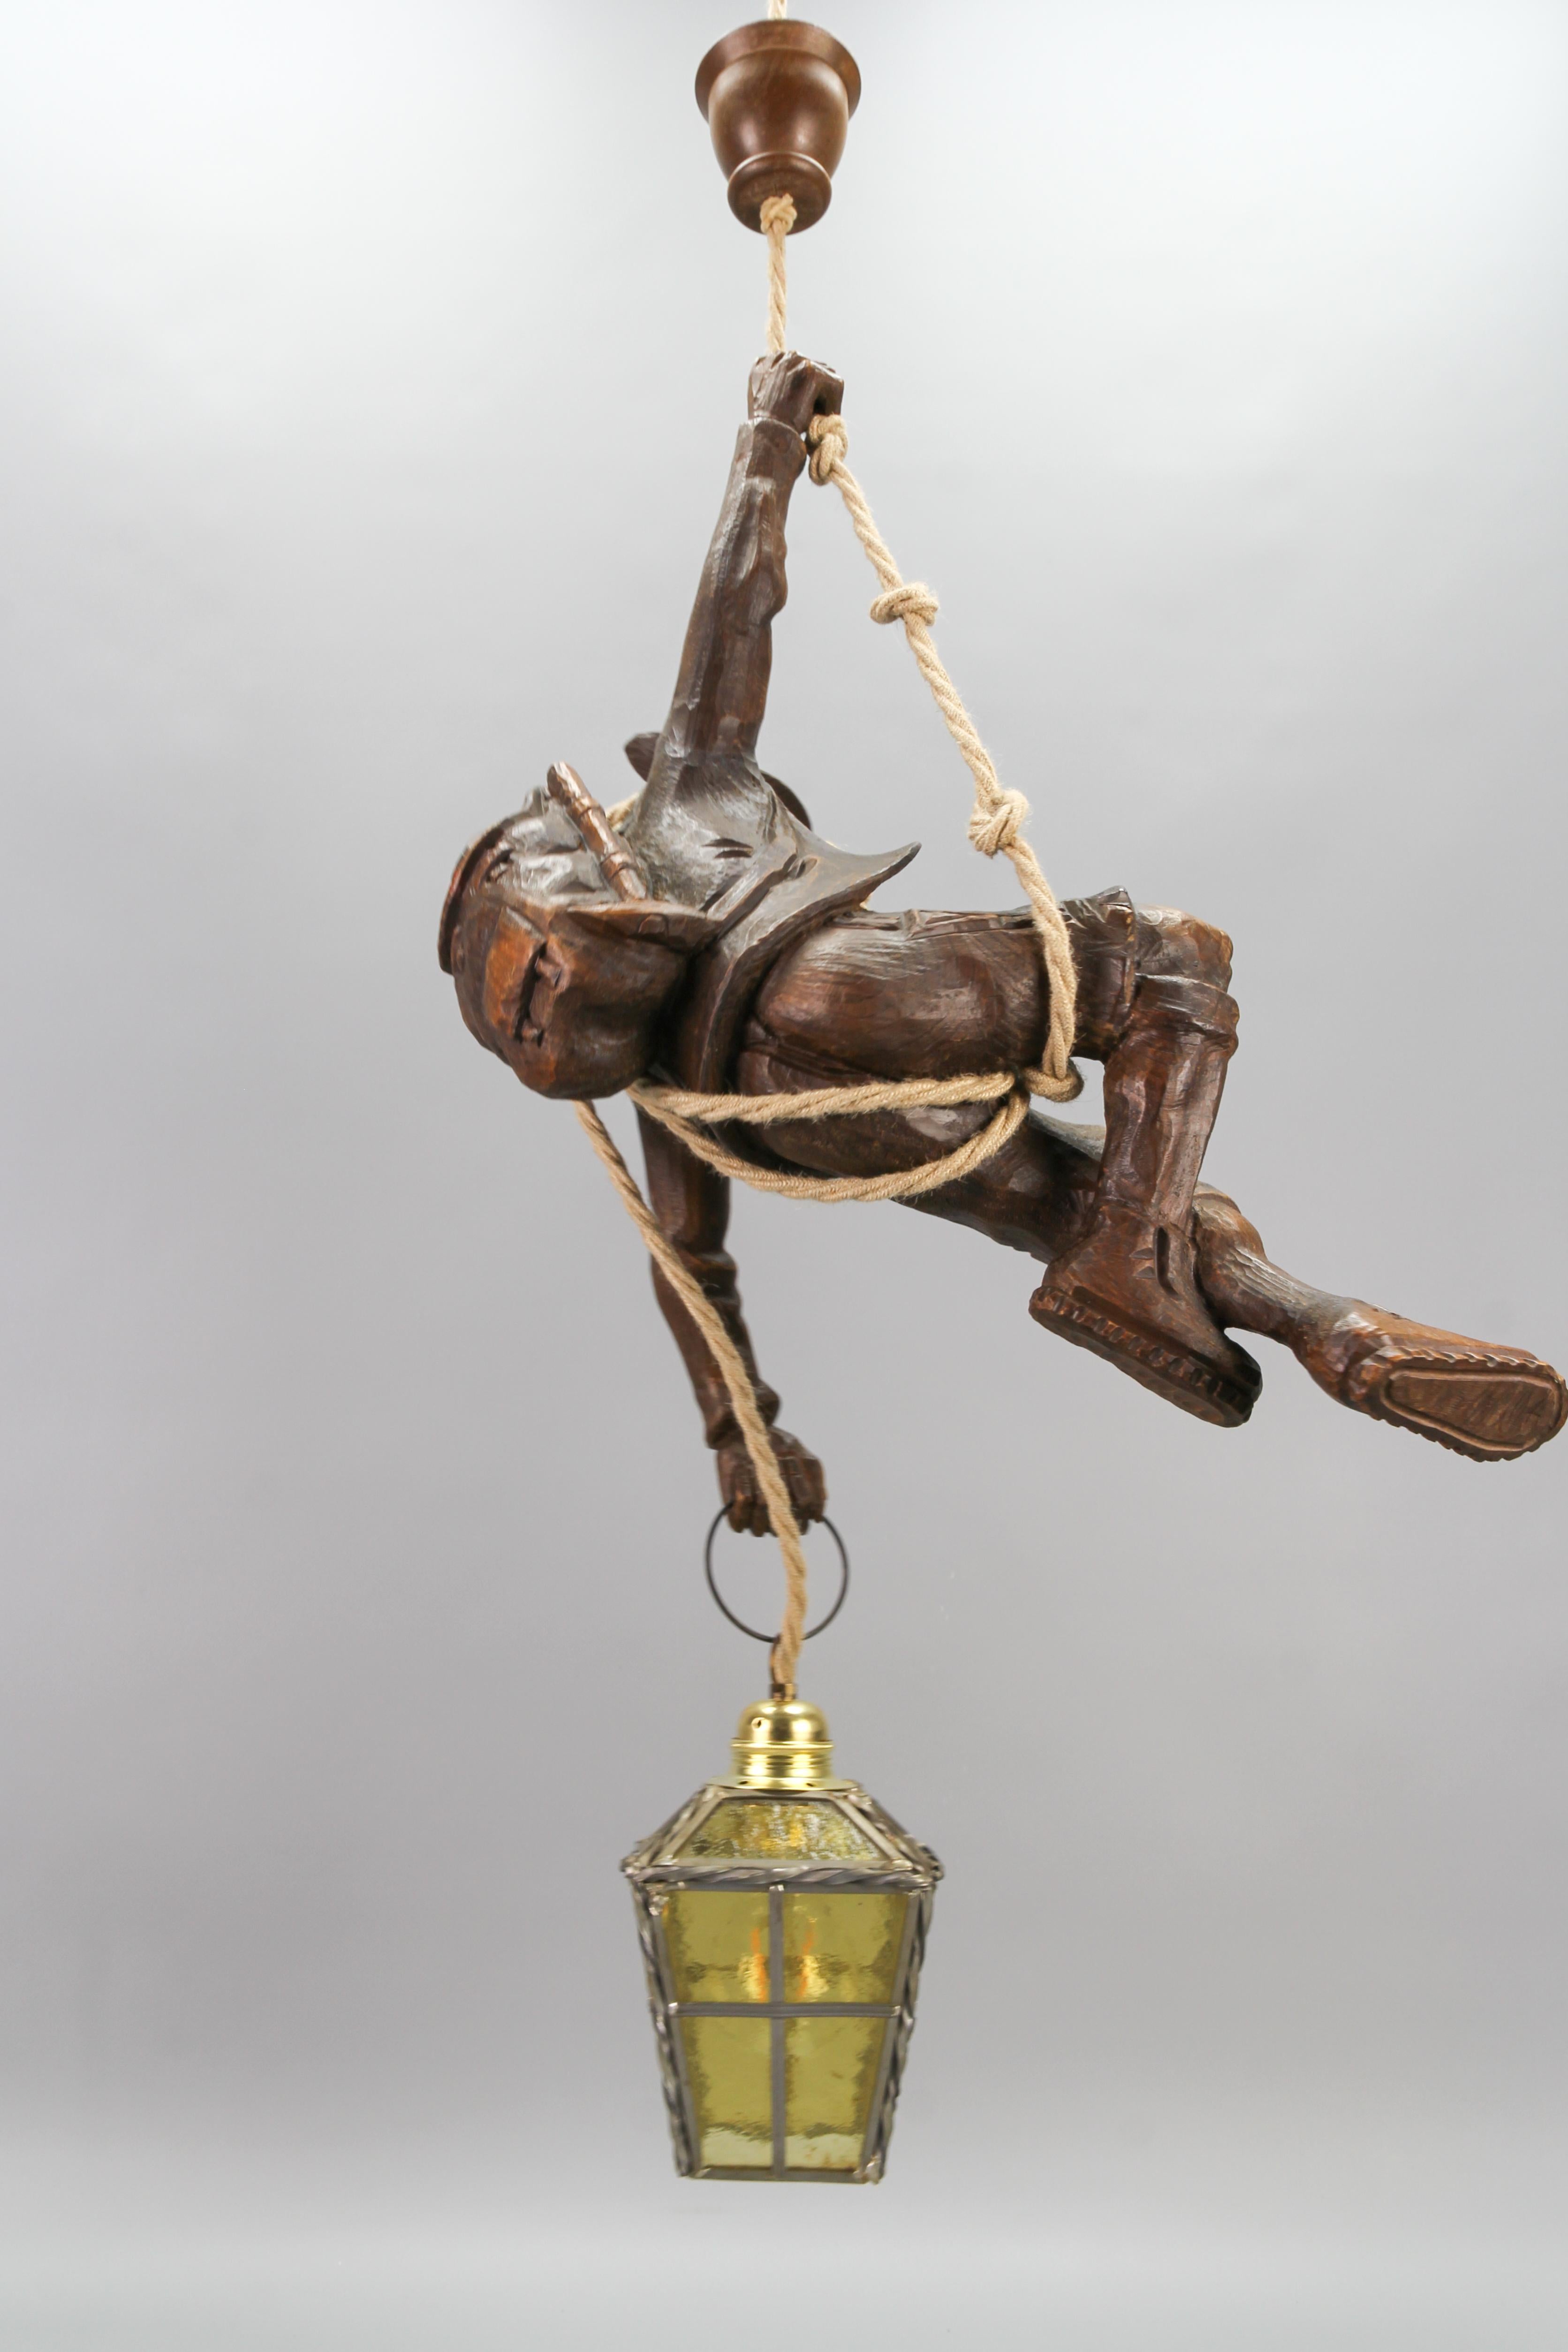 Mid-20th Century Large Pendant Light Fixture with Carved Climber Figure and Lantern, Germany For Sale